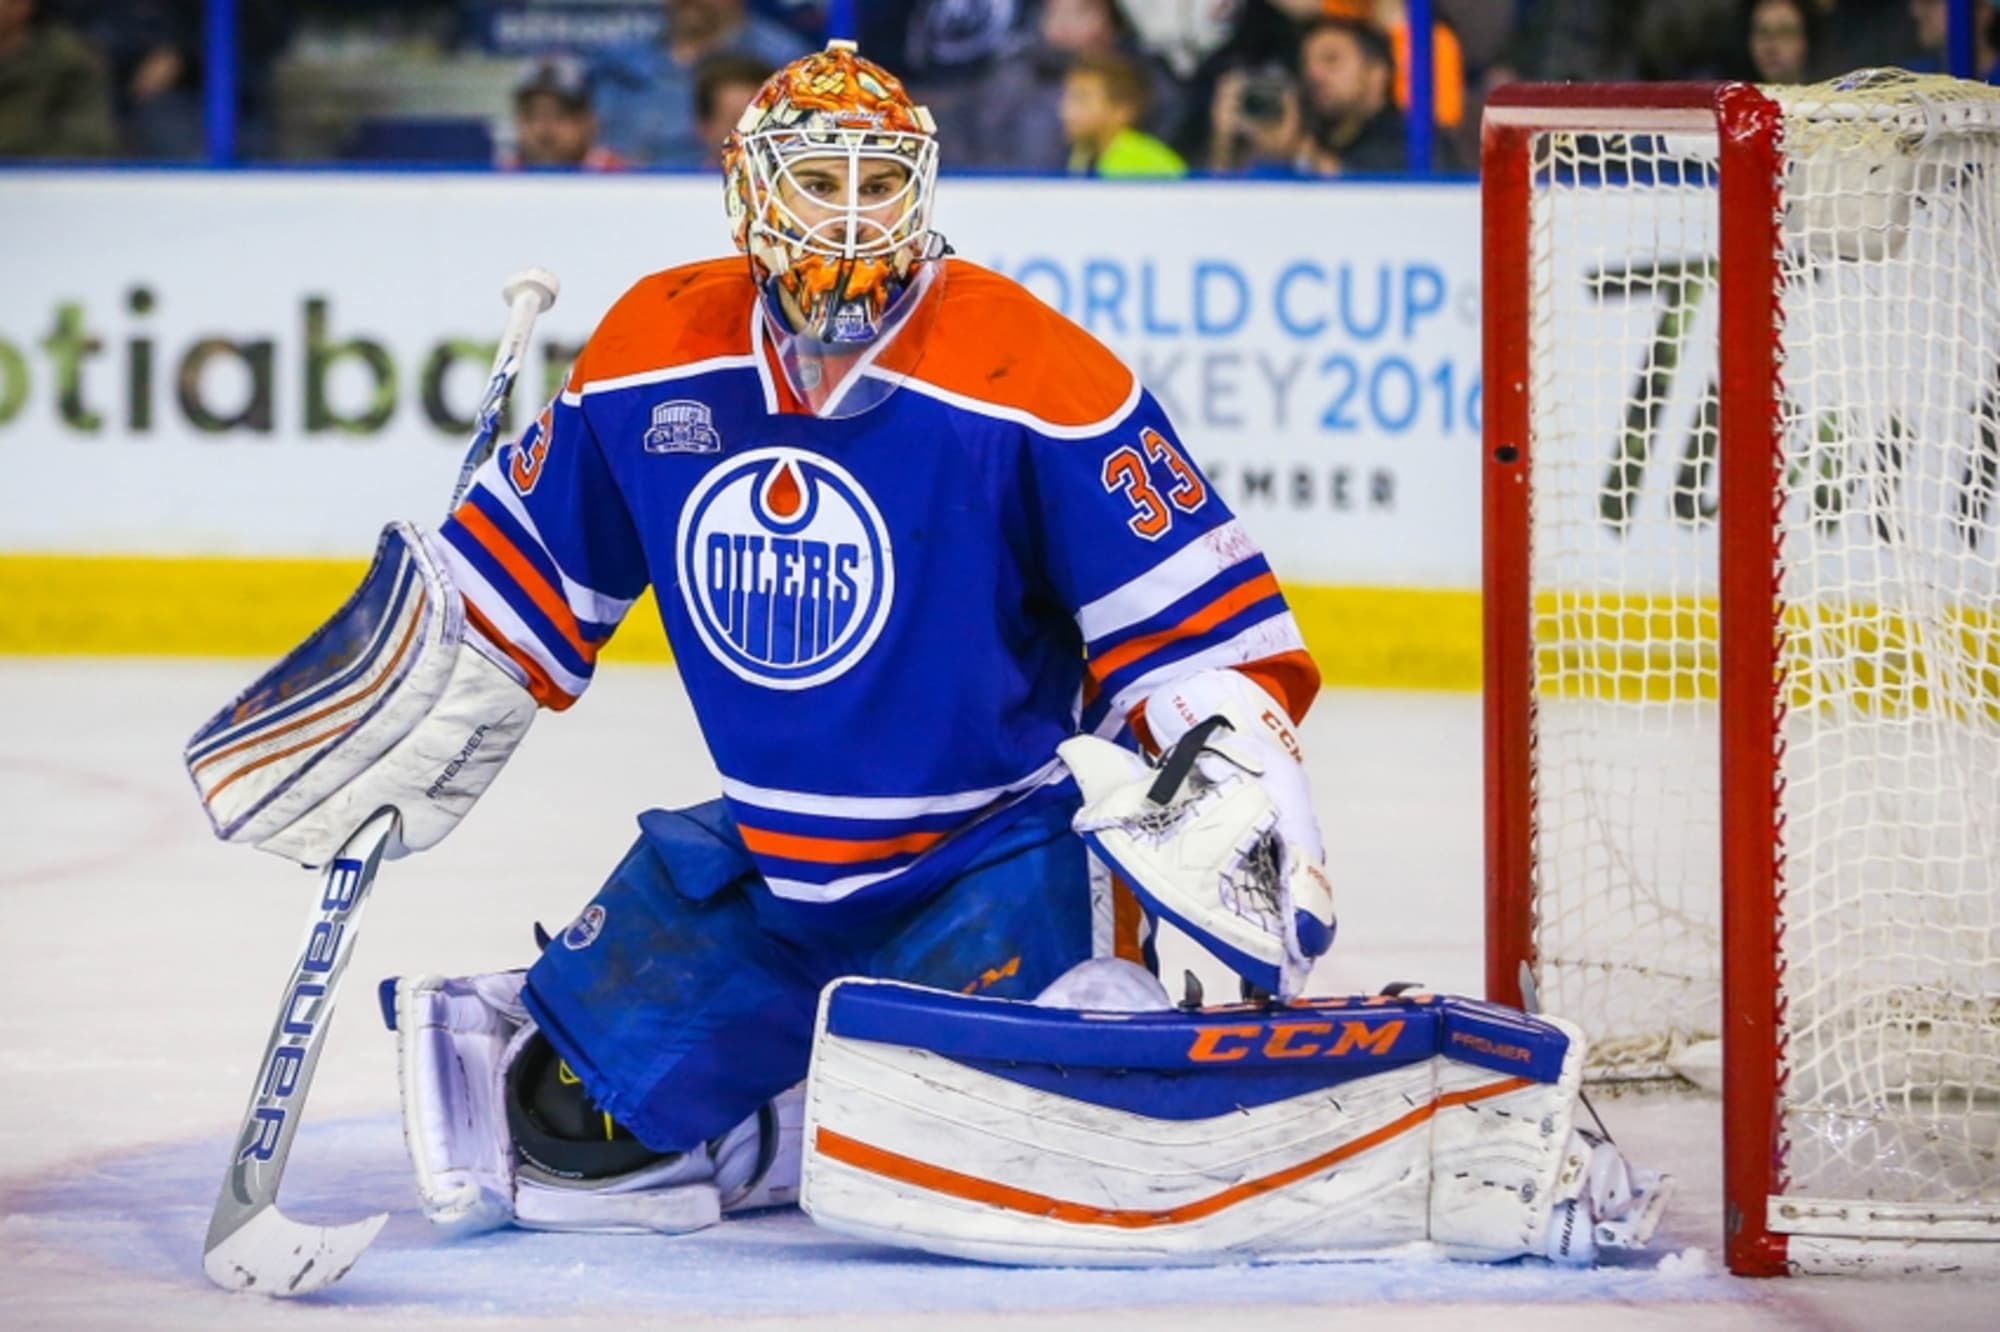 Edmonton Oilers Named to World Cup of Hockey Rosters